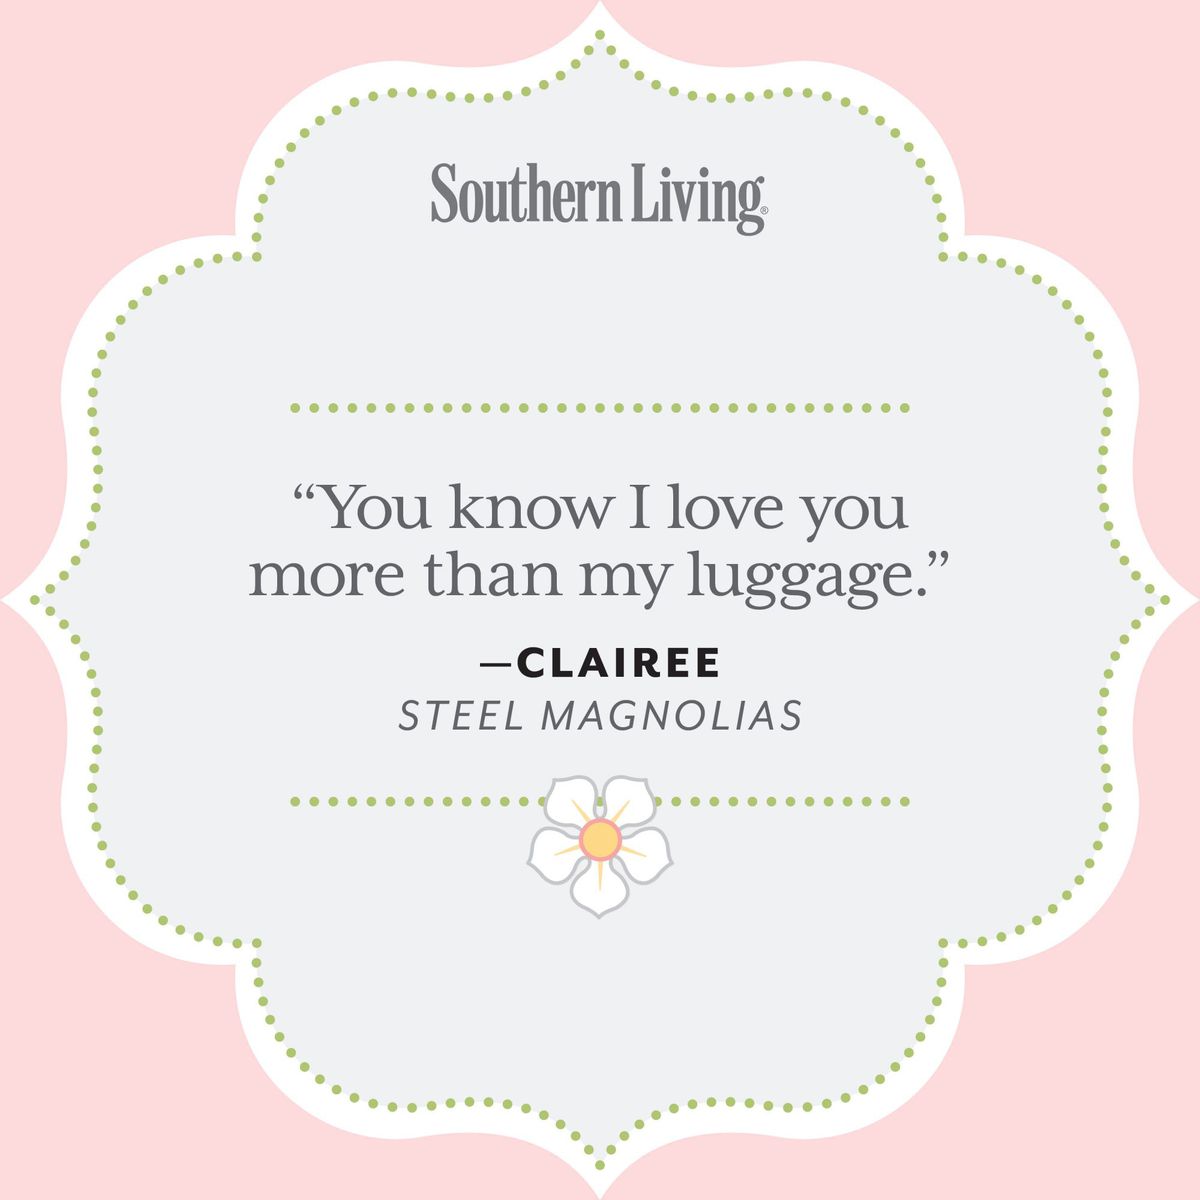 25 Colorful Quotes From Steel Magnolias Southern Living